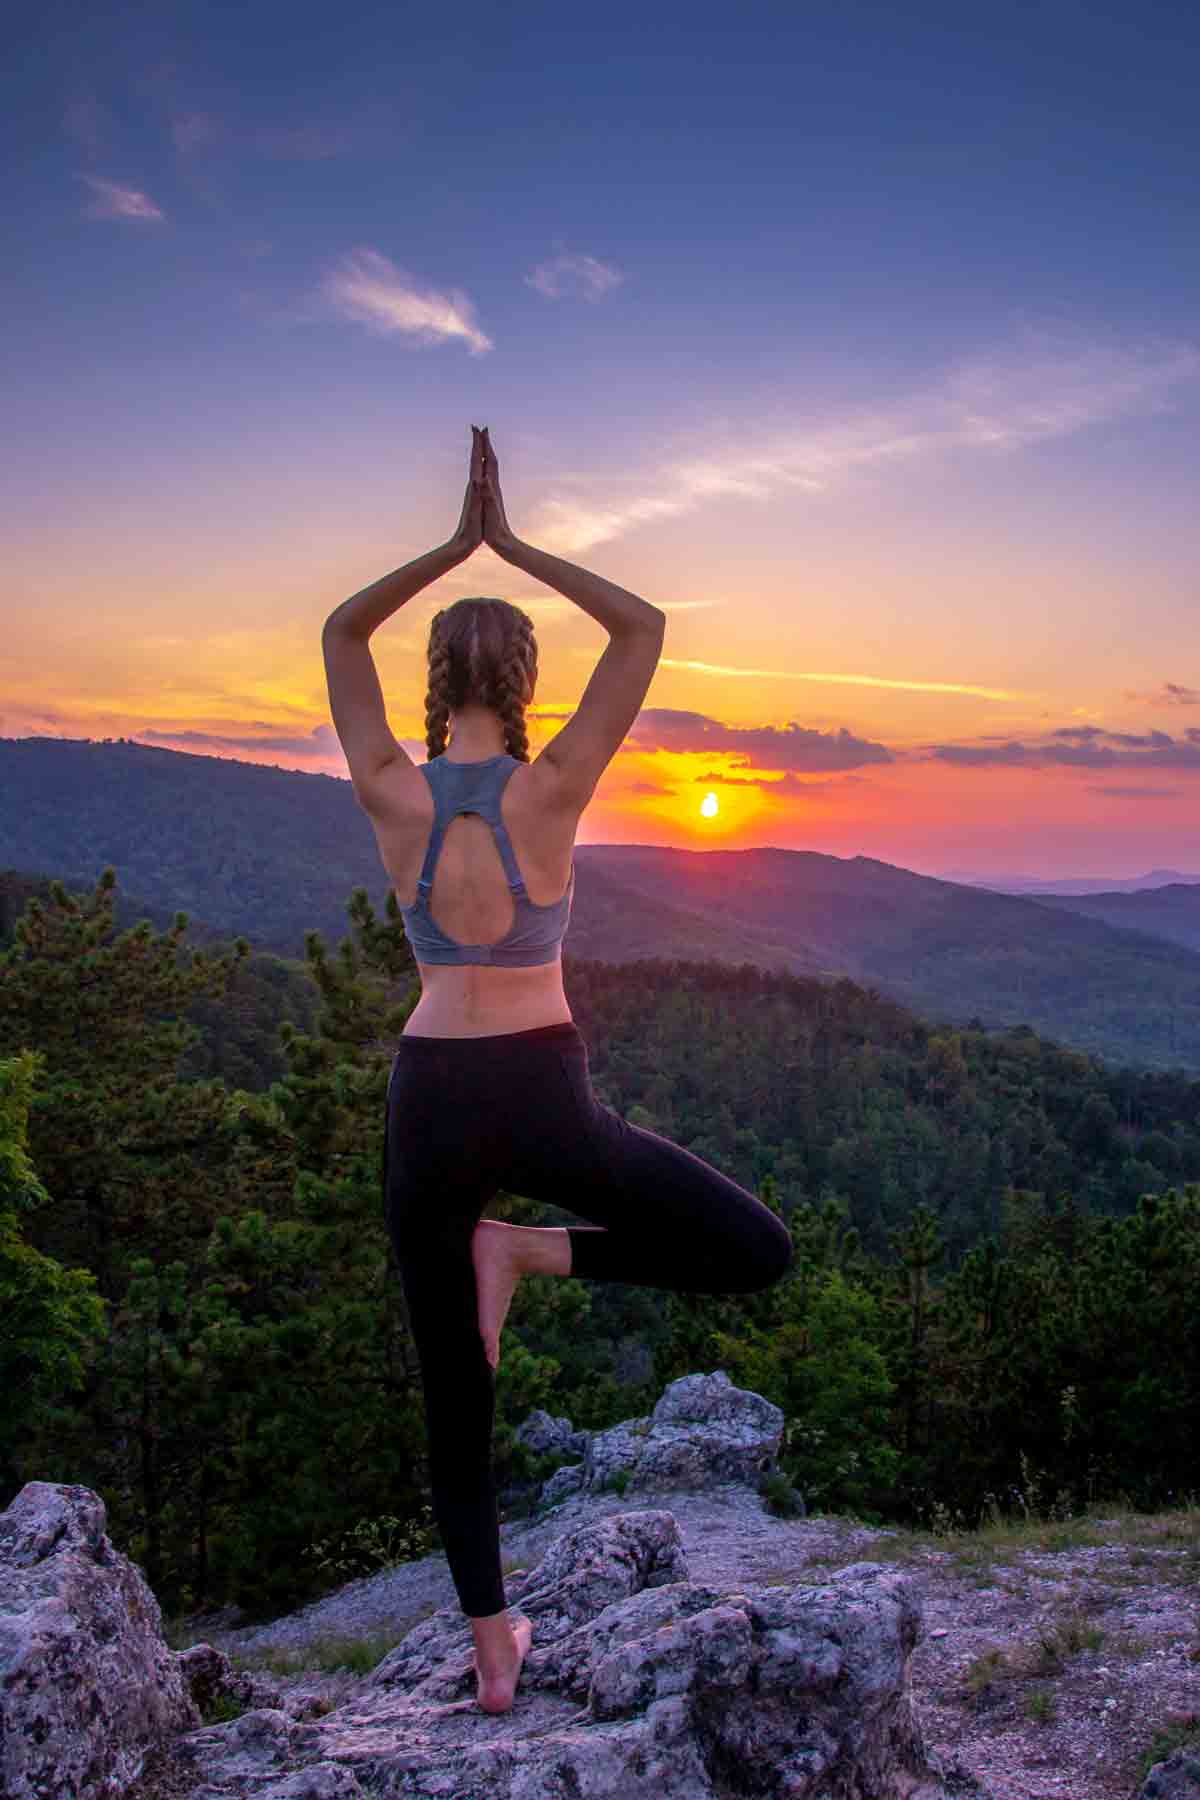 Yoga on a mountain at sunset